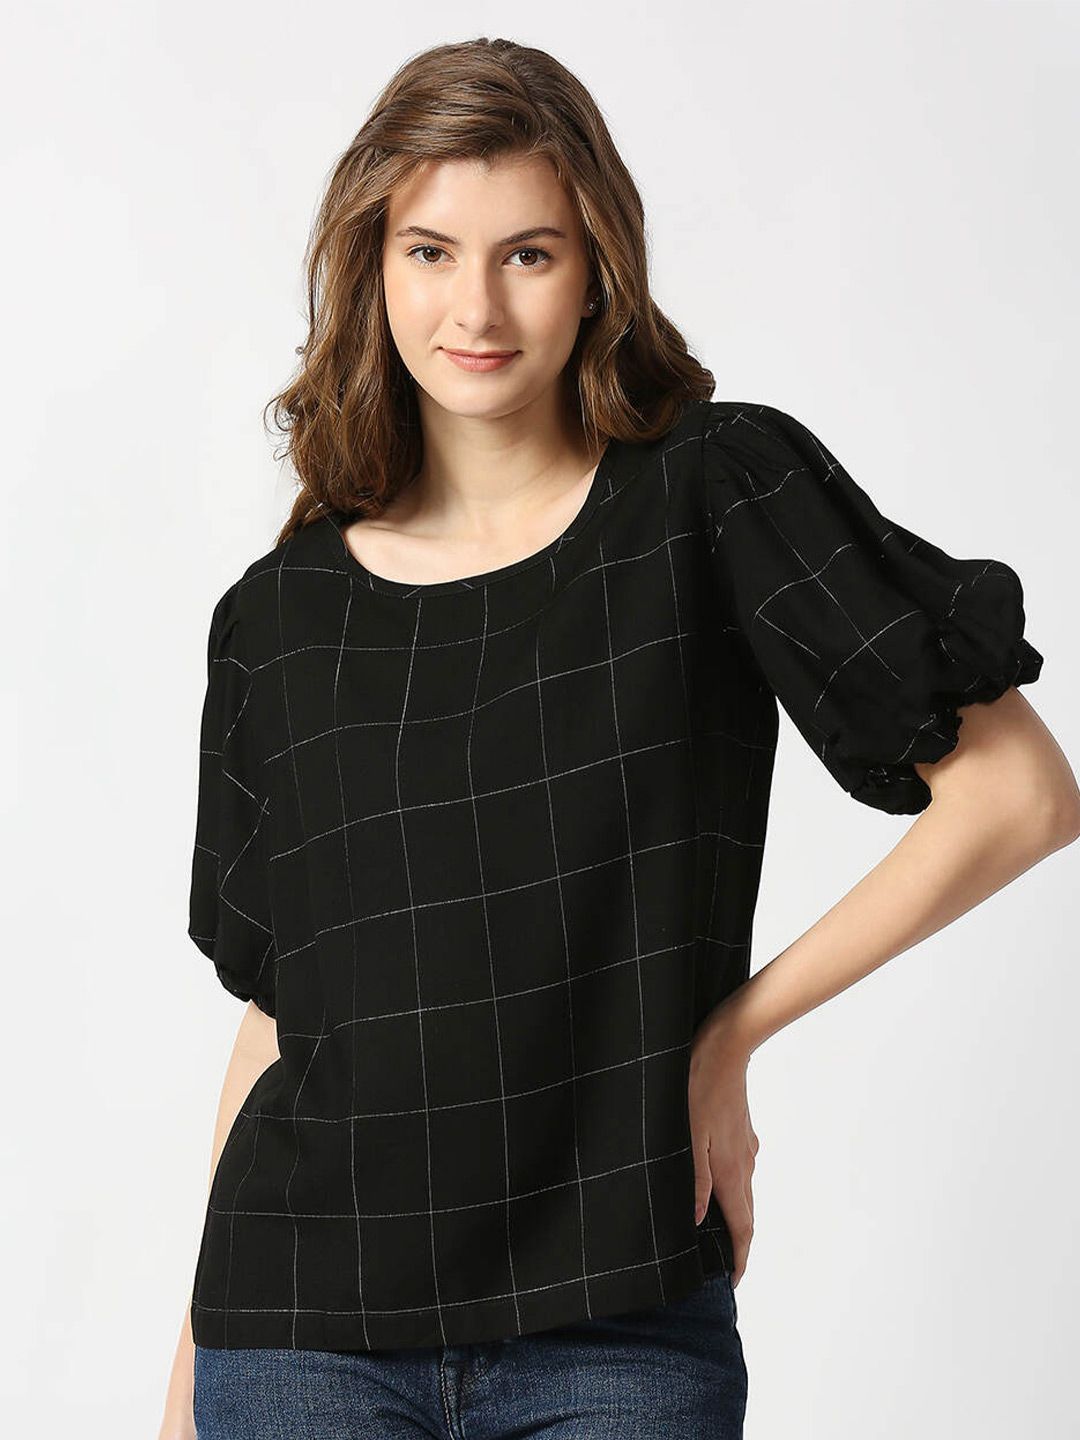 Pepe Jeans Women Black Checked Top Price in India